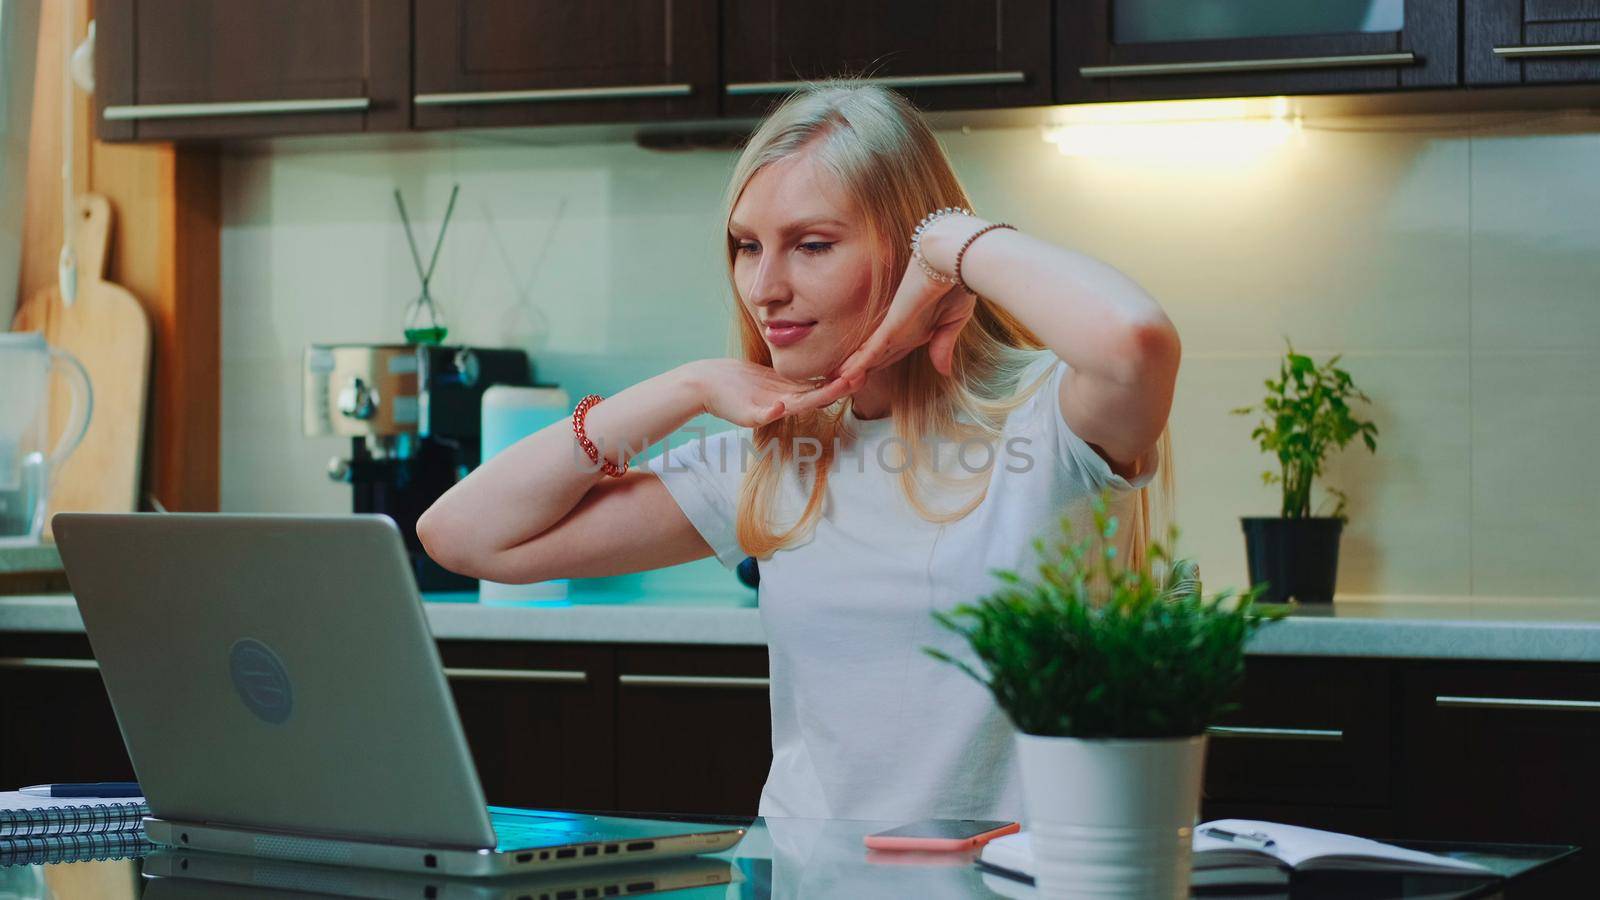 Blonde woman listening to the music and raising her arms in front of computer. She singing and sitting in the kitchen at home.